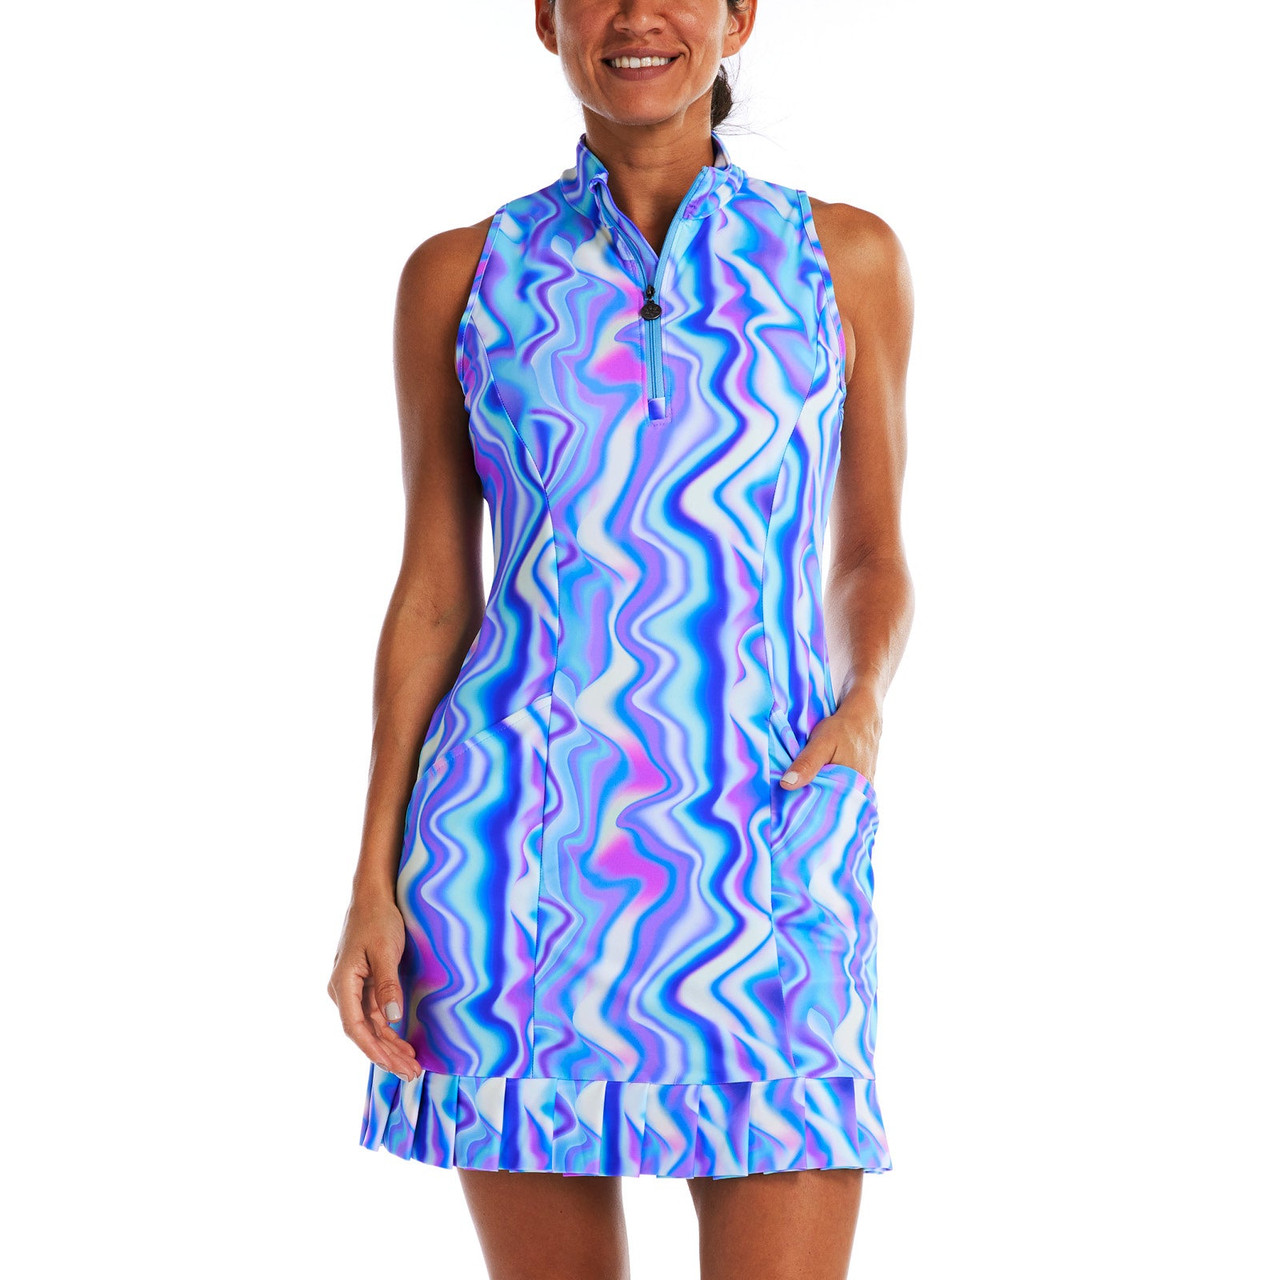 NEW Kyodan Outdoor Athletic Women’s Blue Leaves Tennis Golf Dress - Small